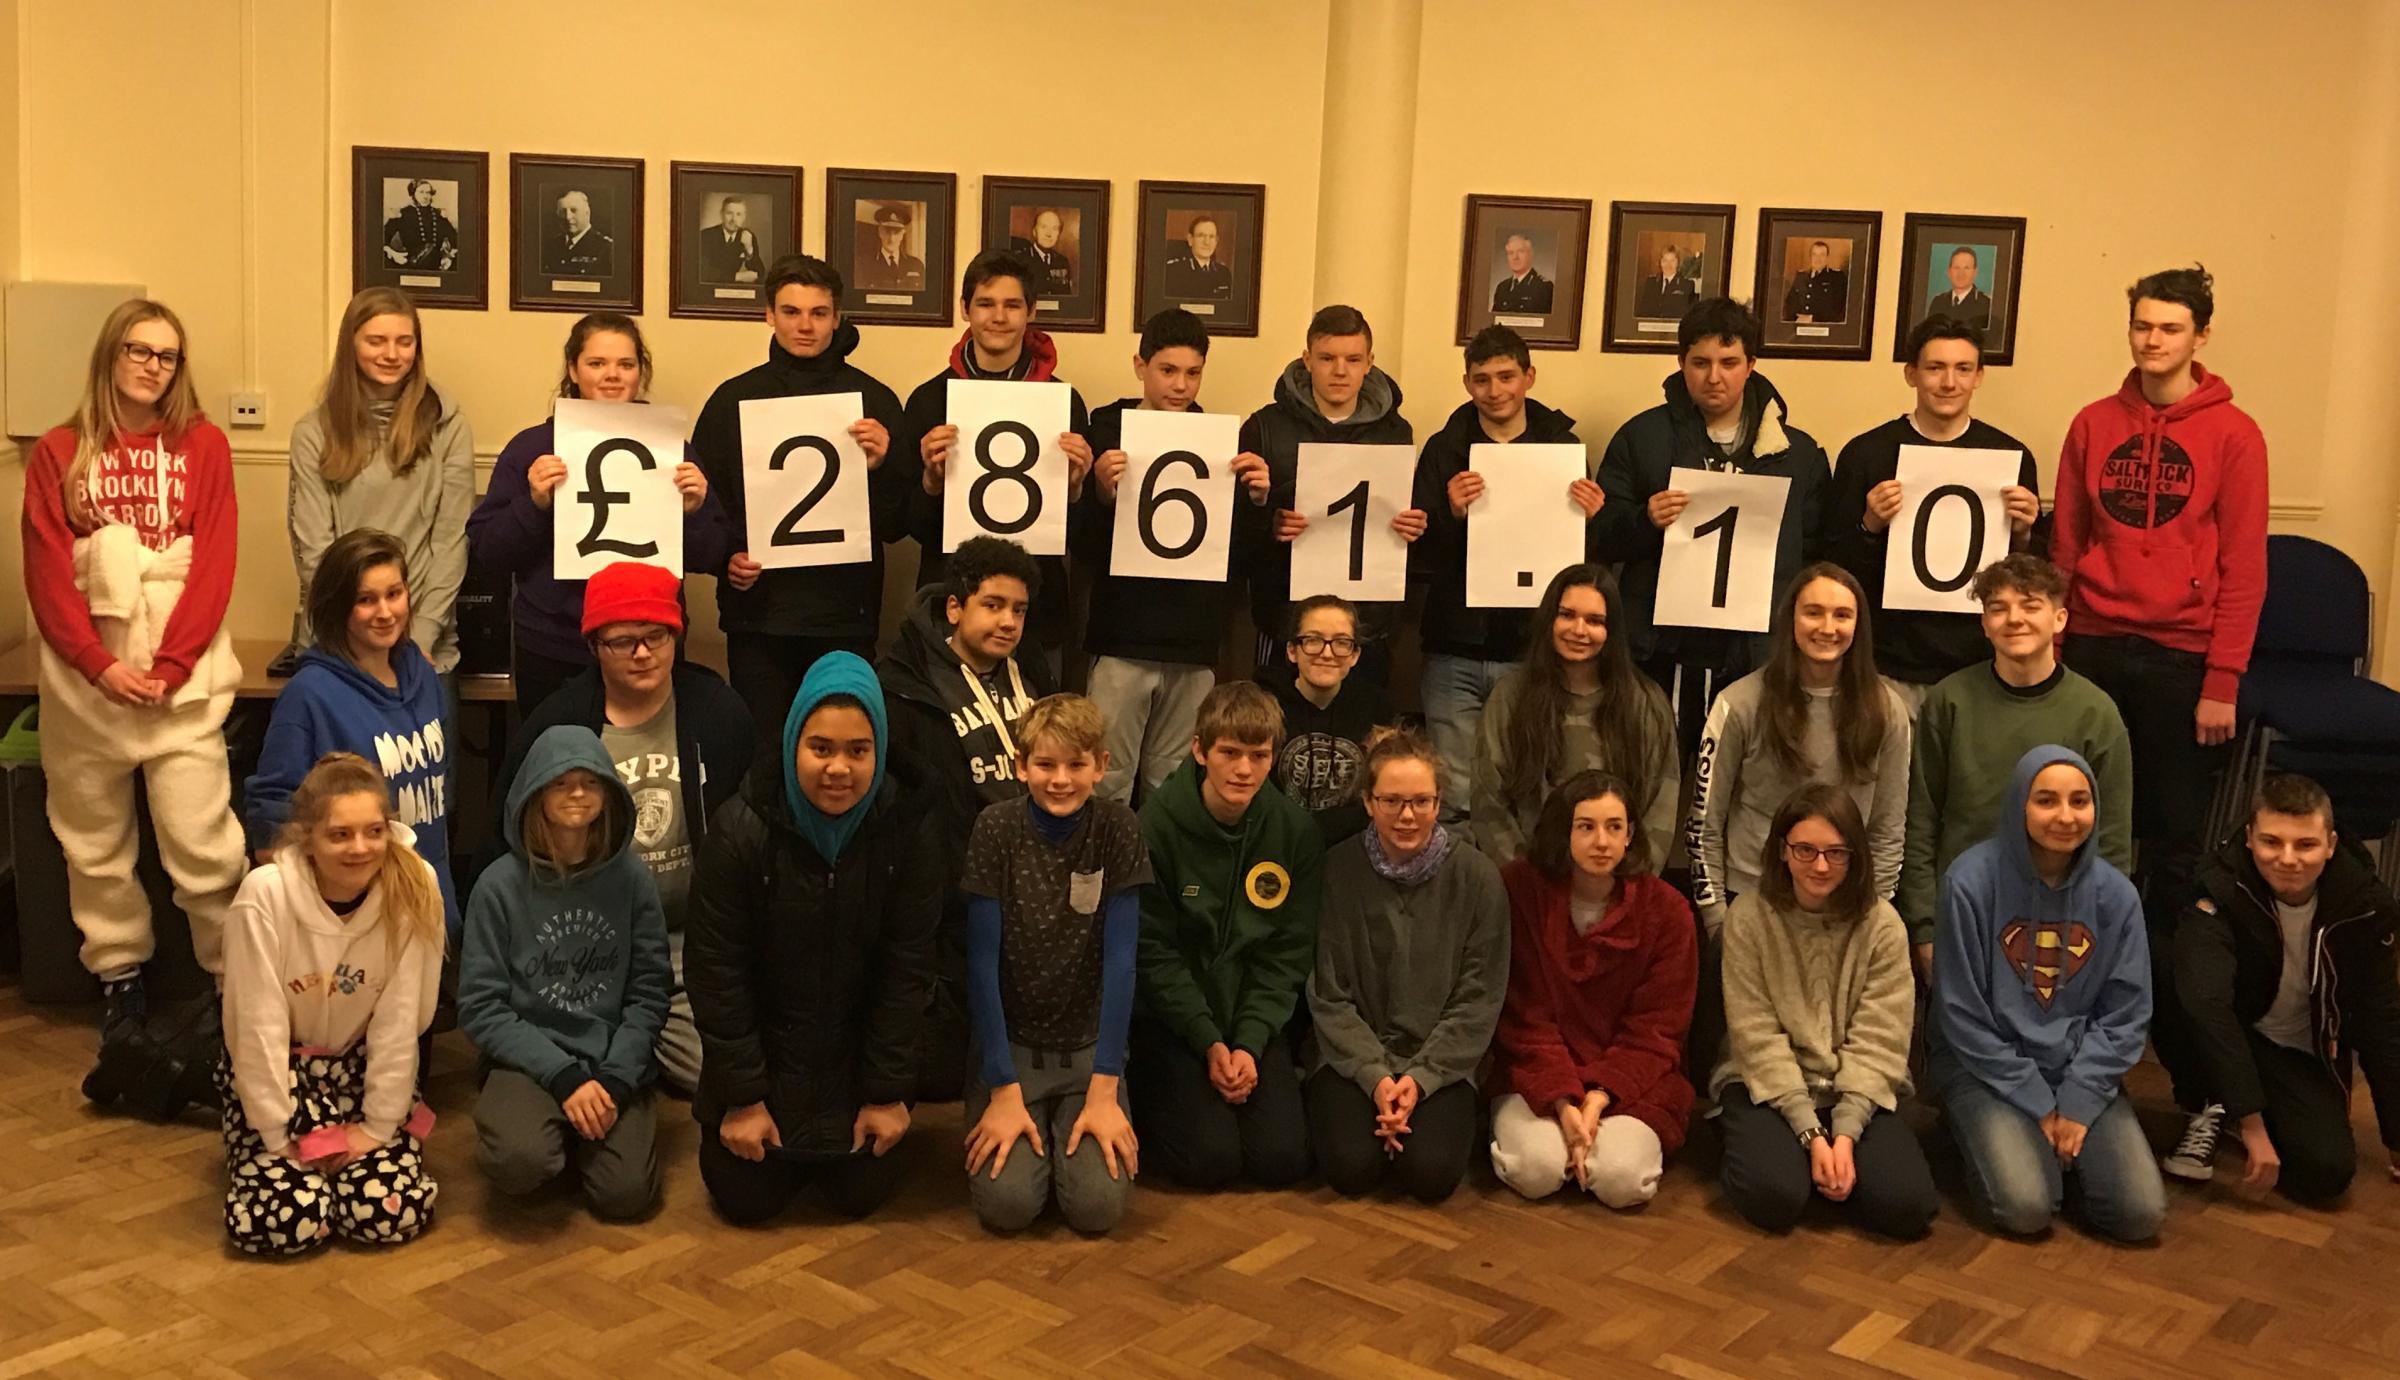 Cadets sleep rough to raise money for homeless - The Wiltshire Gazette and Herald